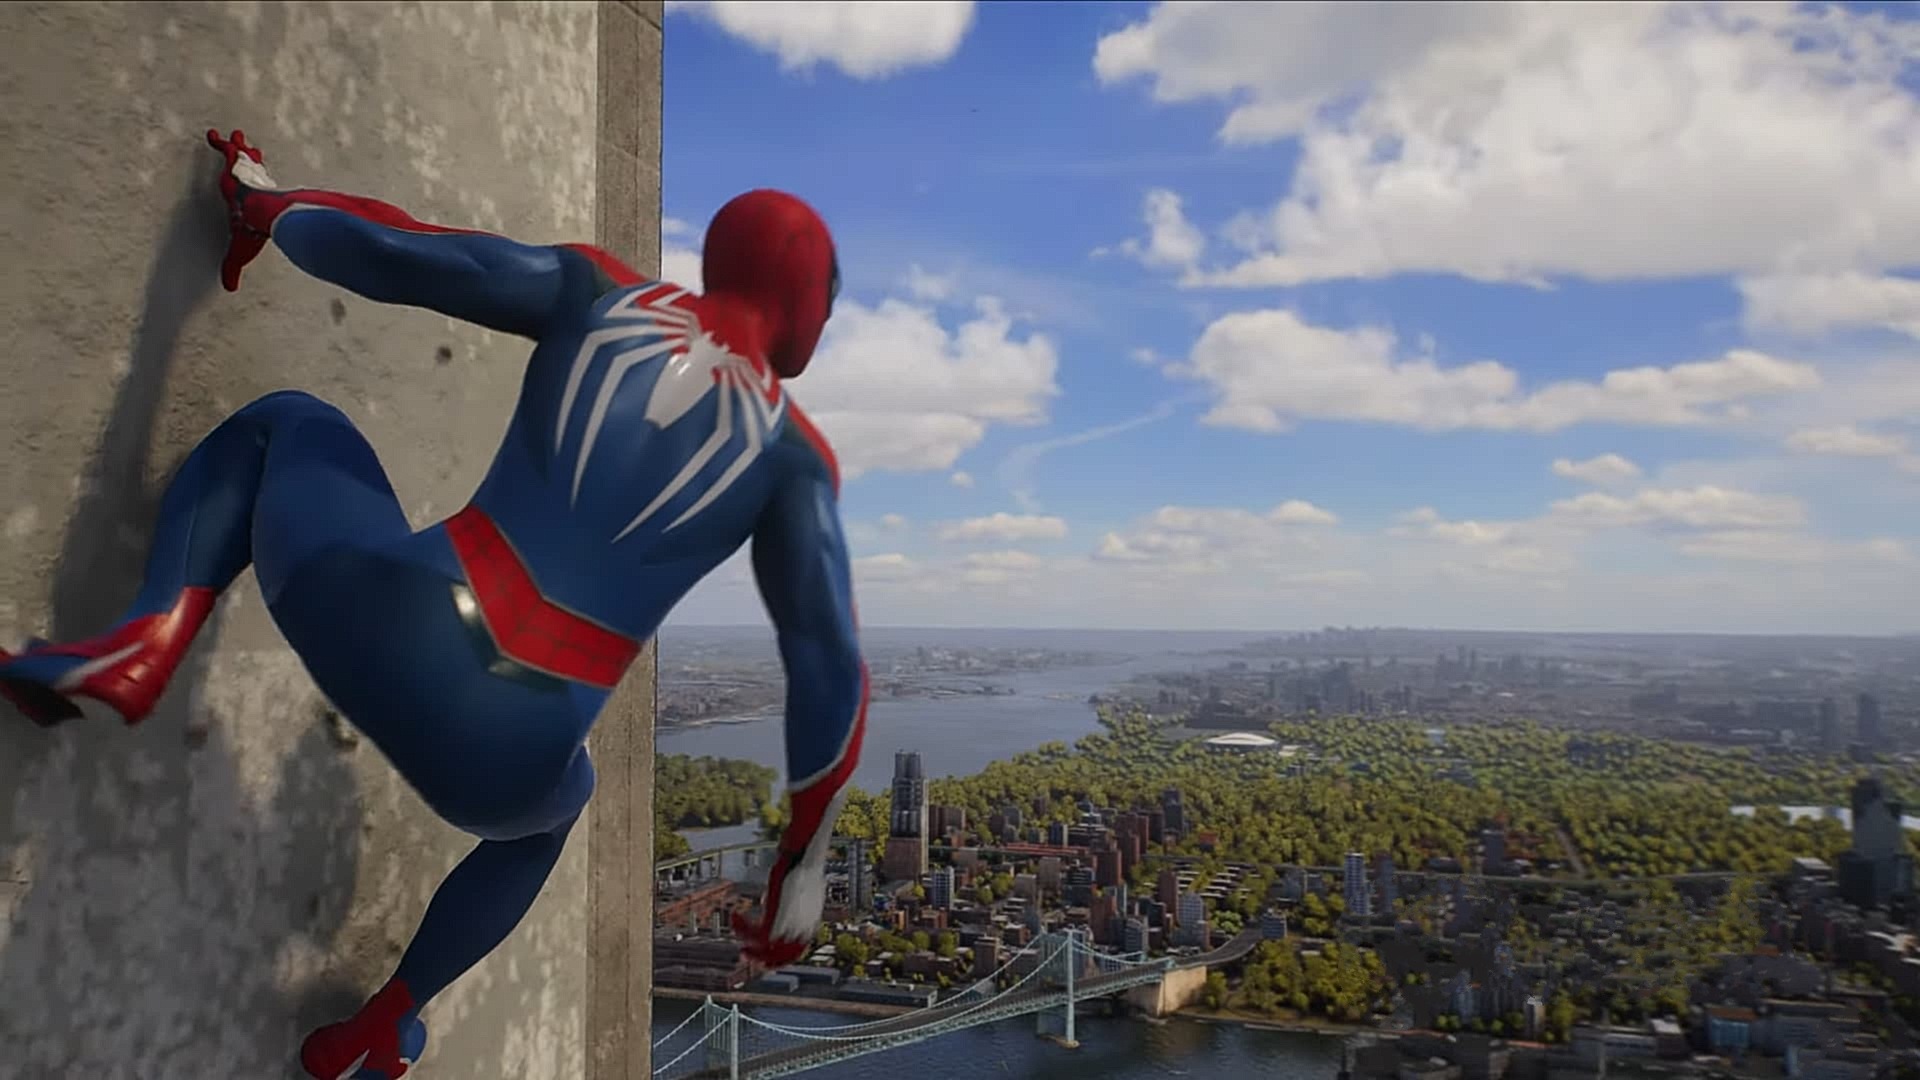 Marvel's Spider-Man 2 gets a 91 on metacritic. : r/playstation